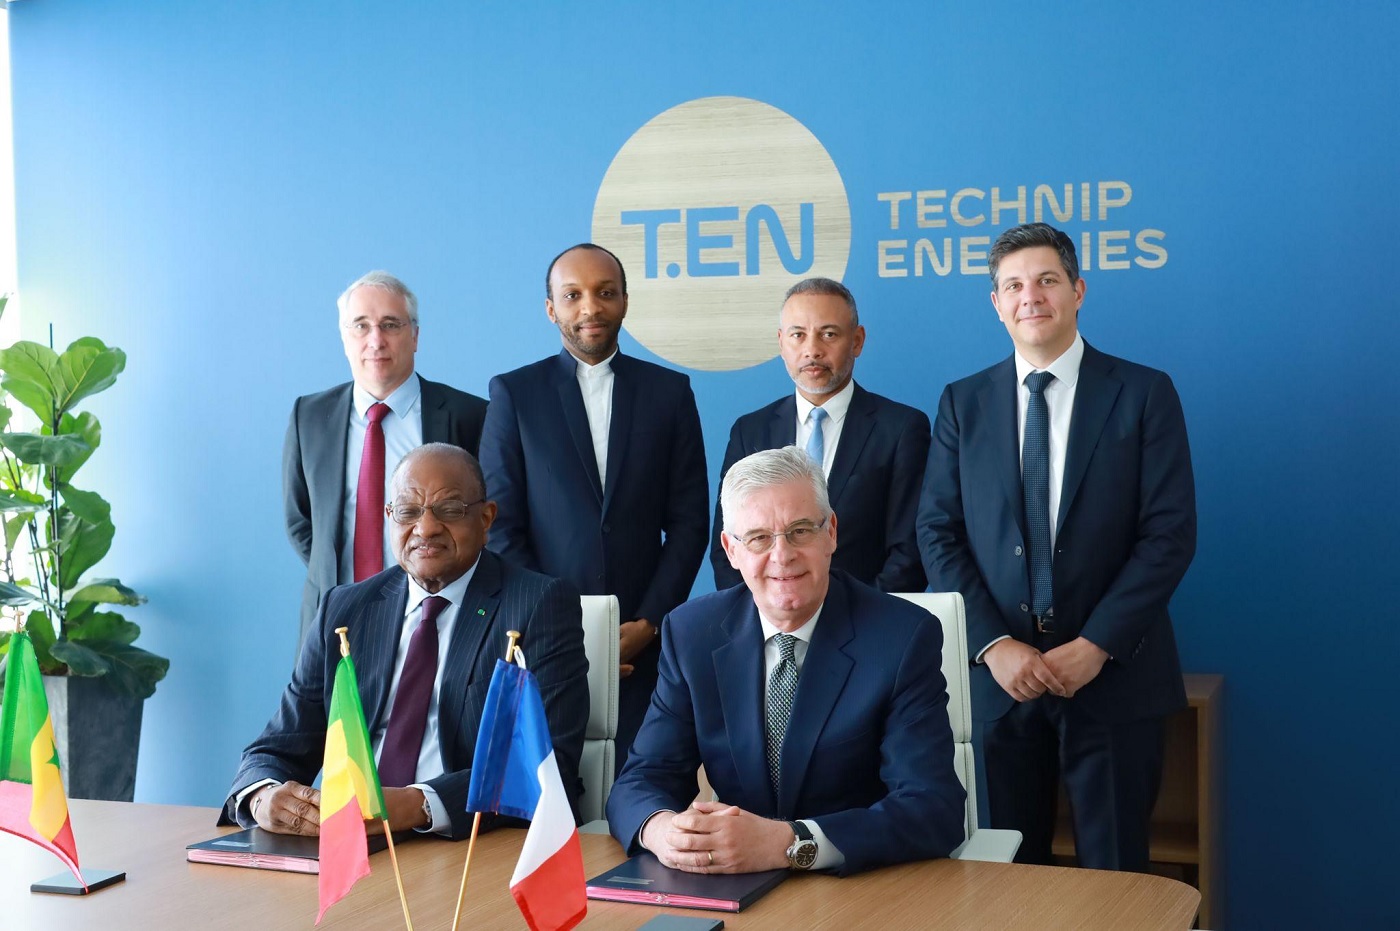 Technip Energies and COS Petrogaz to collaborate on LNG and decarbonisation in Senegal